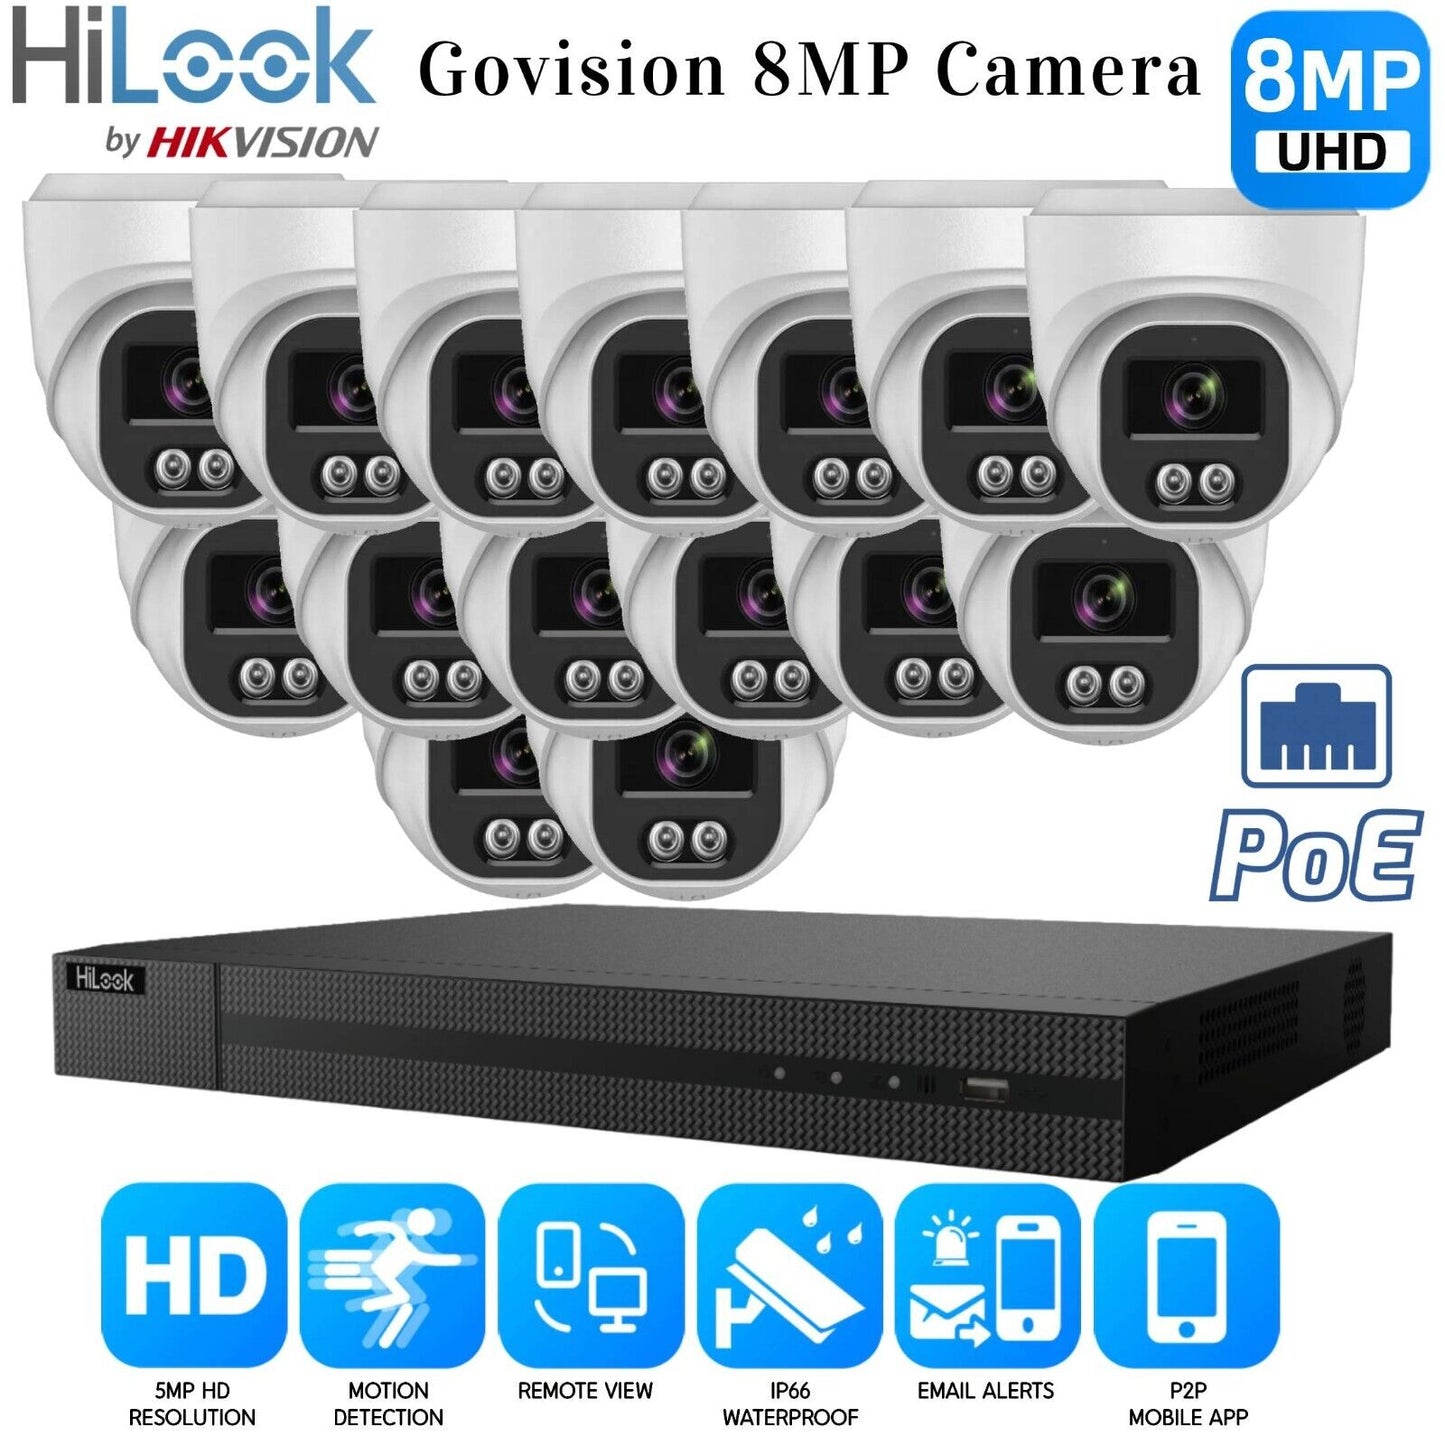 HIKVISION CCTV SYSTEM IP POE 8MP AUDIO MIC CAMERA SMART NIGHTVISION SECURITY KIT 16CH NVR 16x Cameras 2TB HDD